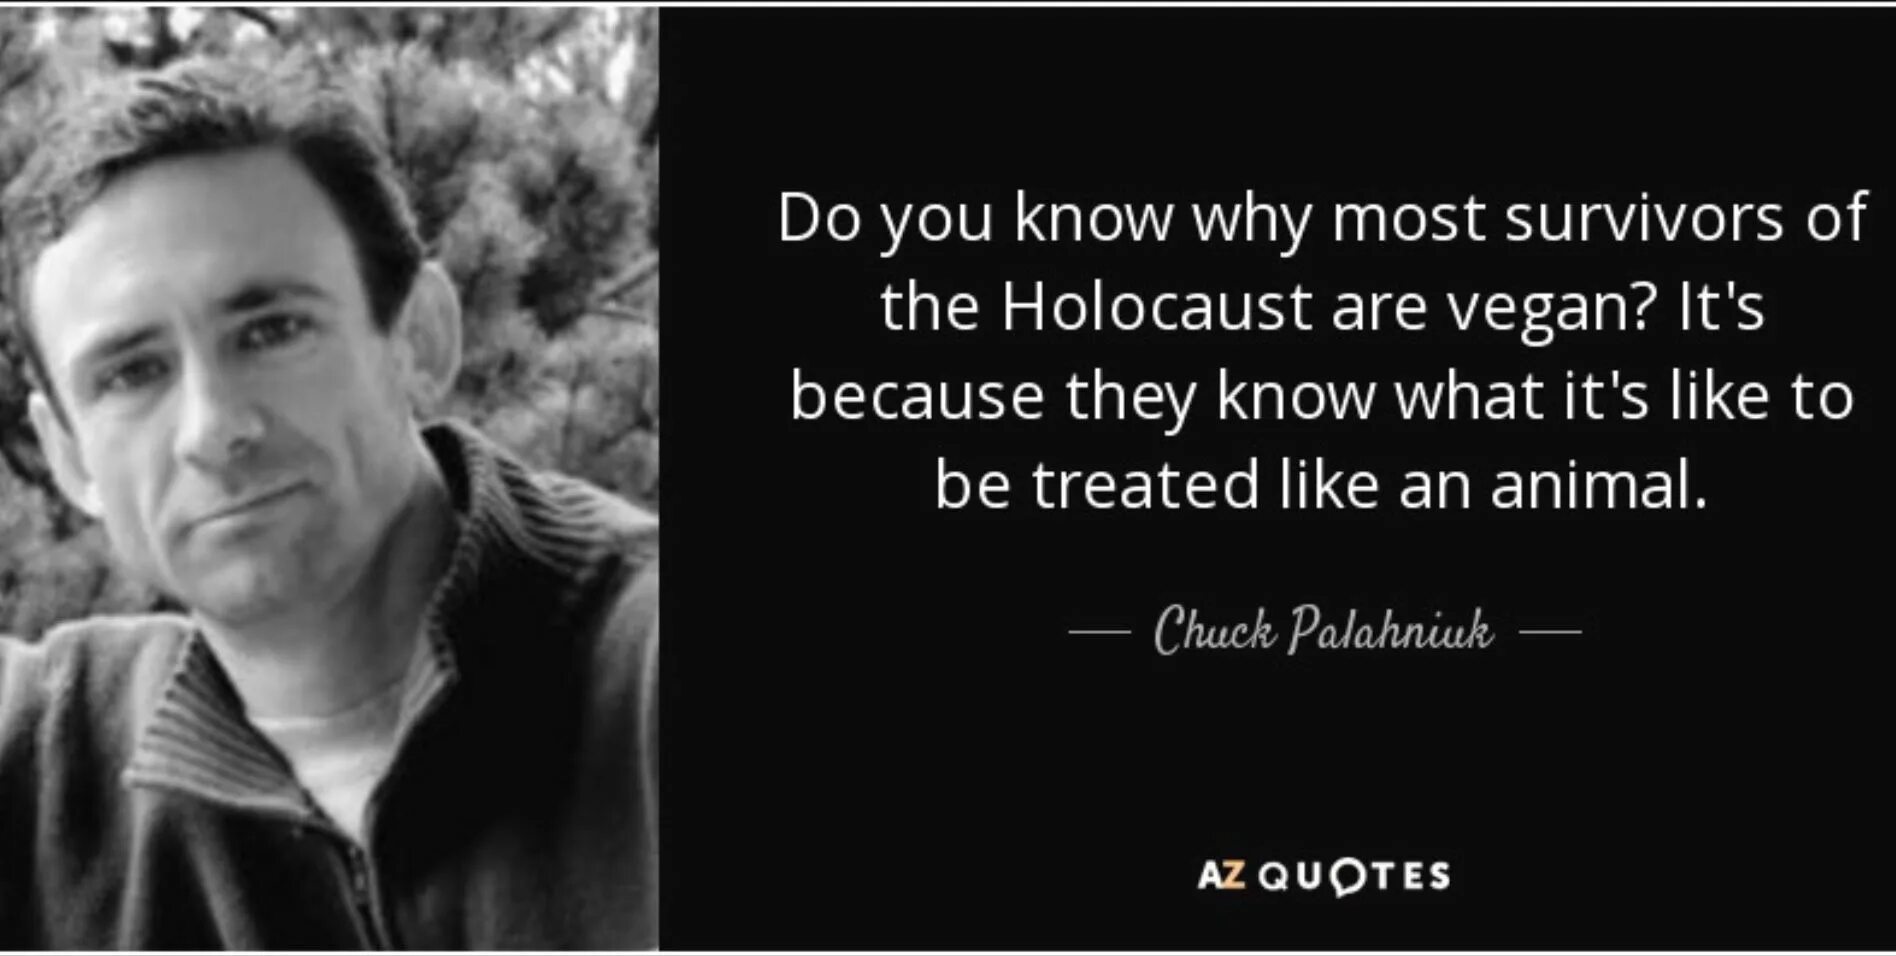 Palahniuk Chuck "tell-all". A person who thinks all the time Мем. Do not resurrect исполнитель. Quotes from great people. Do you know who this is